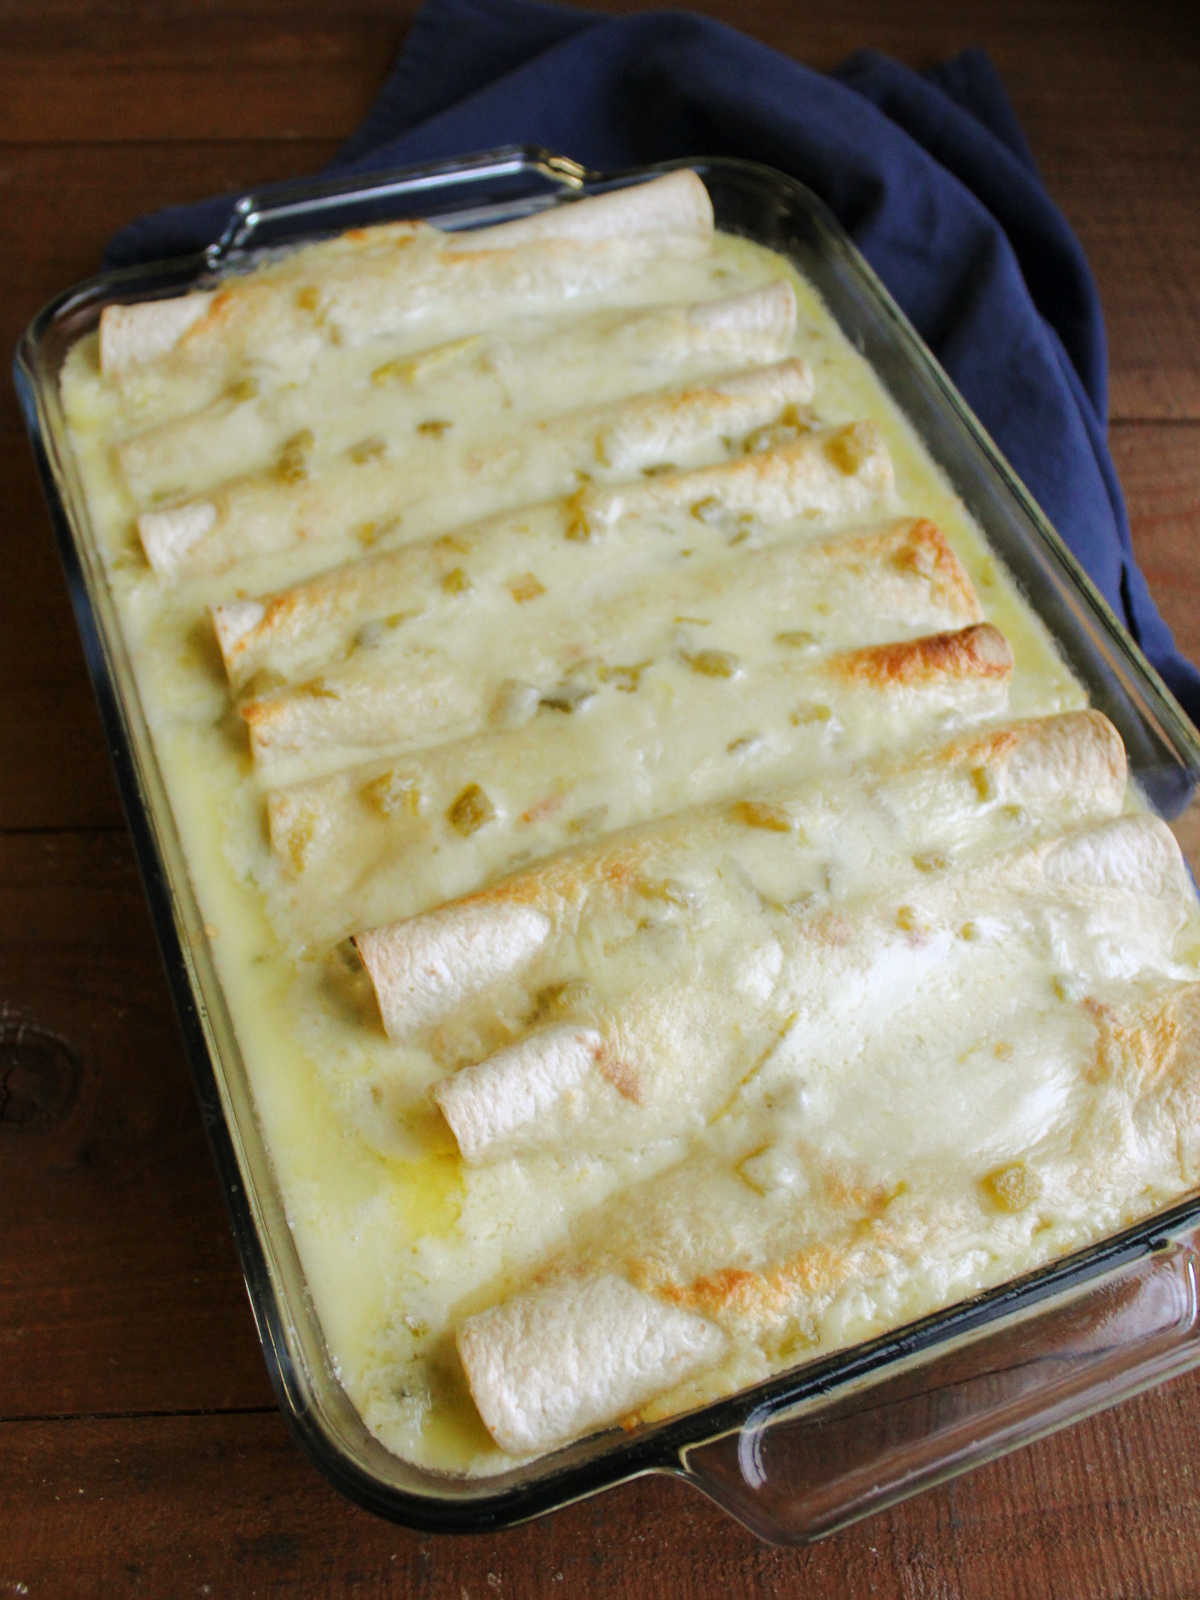 Glass baking dish filled with freshly baked breakfast enchiladas baked in creamy cheese sauce with spots of light golden brown toastiness.